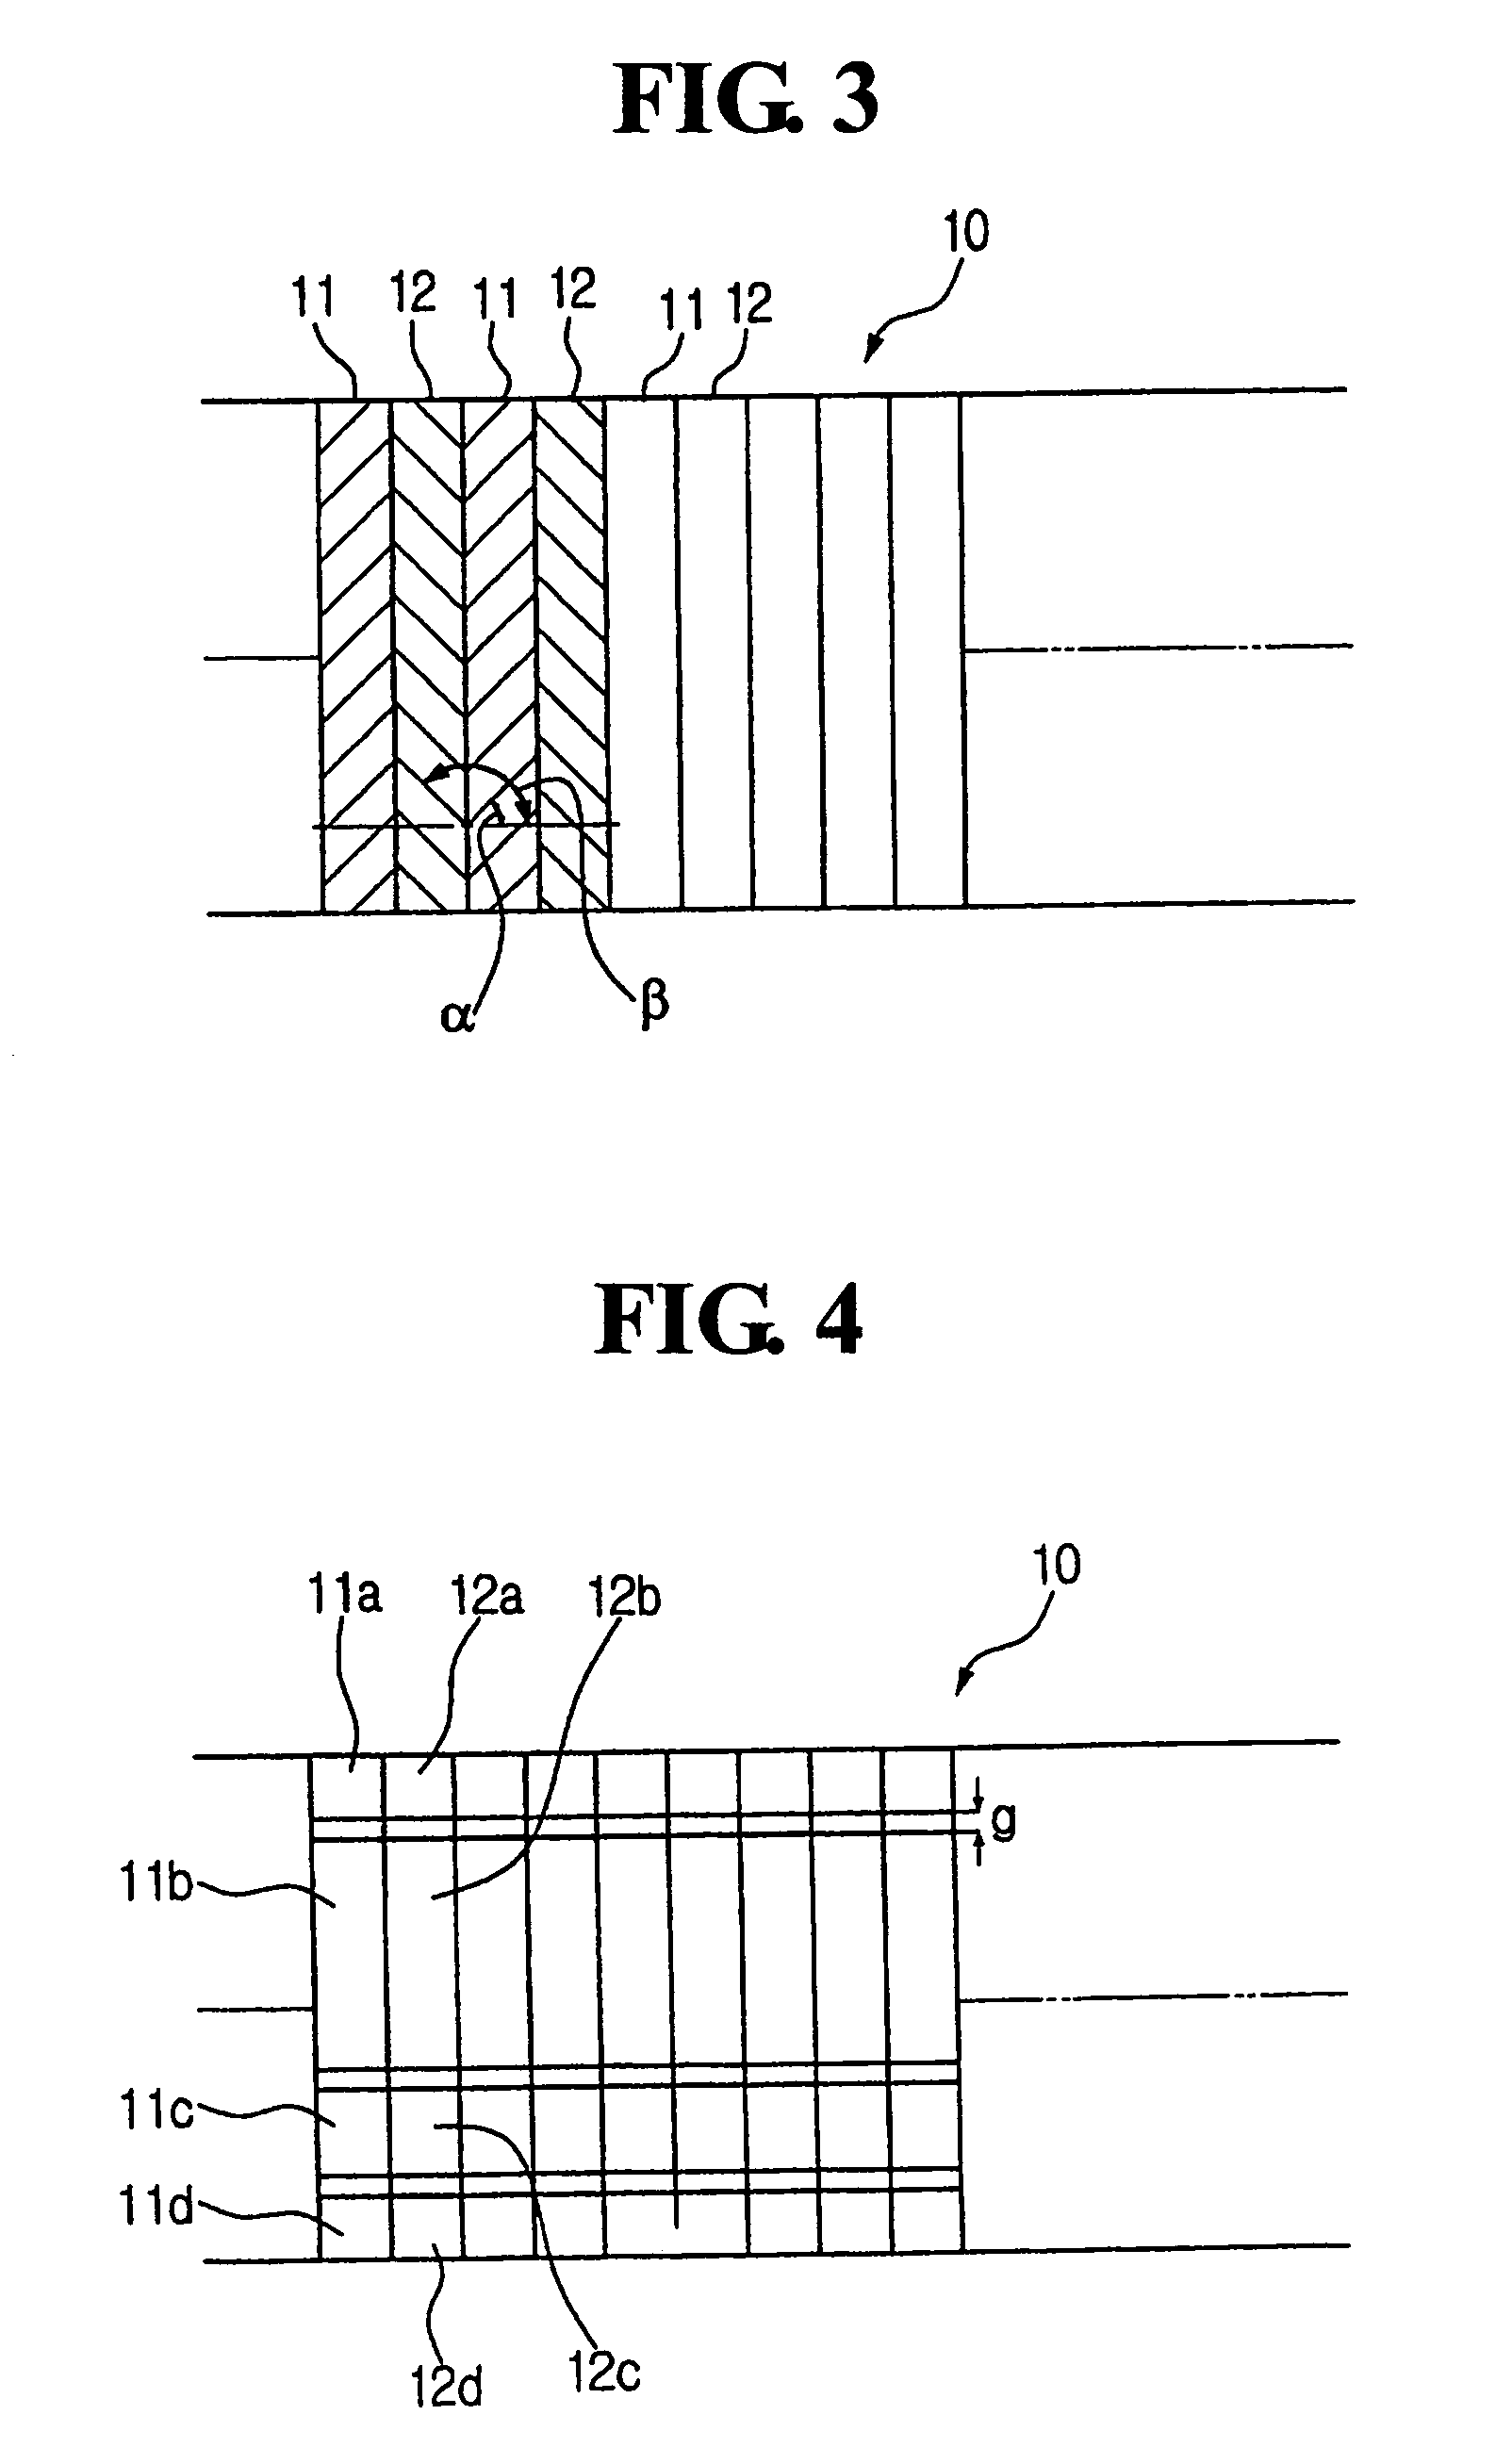 Apparatus and method for detecting an abnormality in a recorded signal